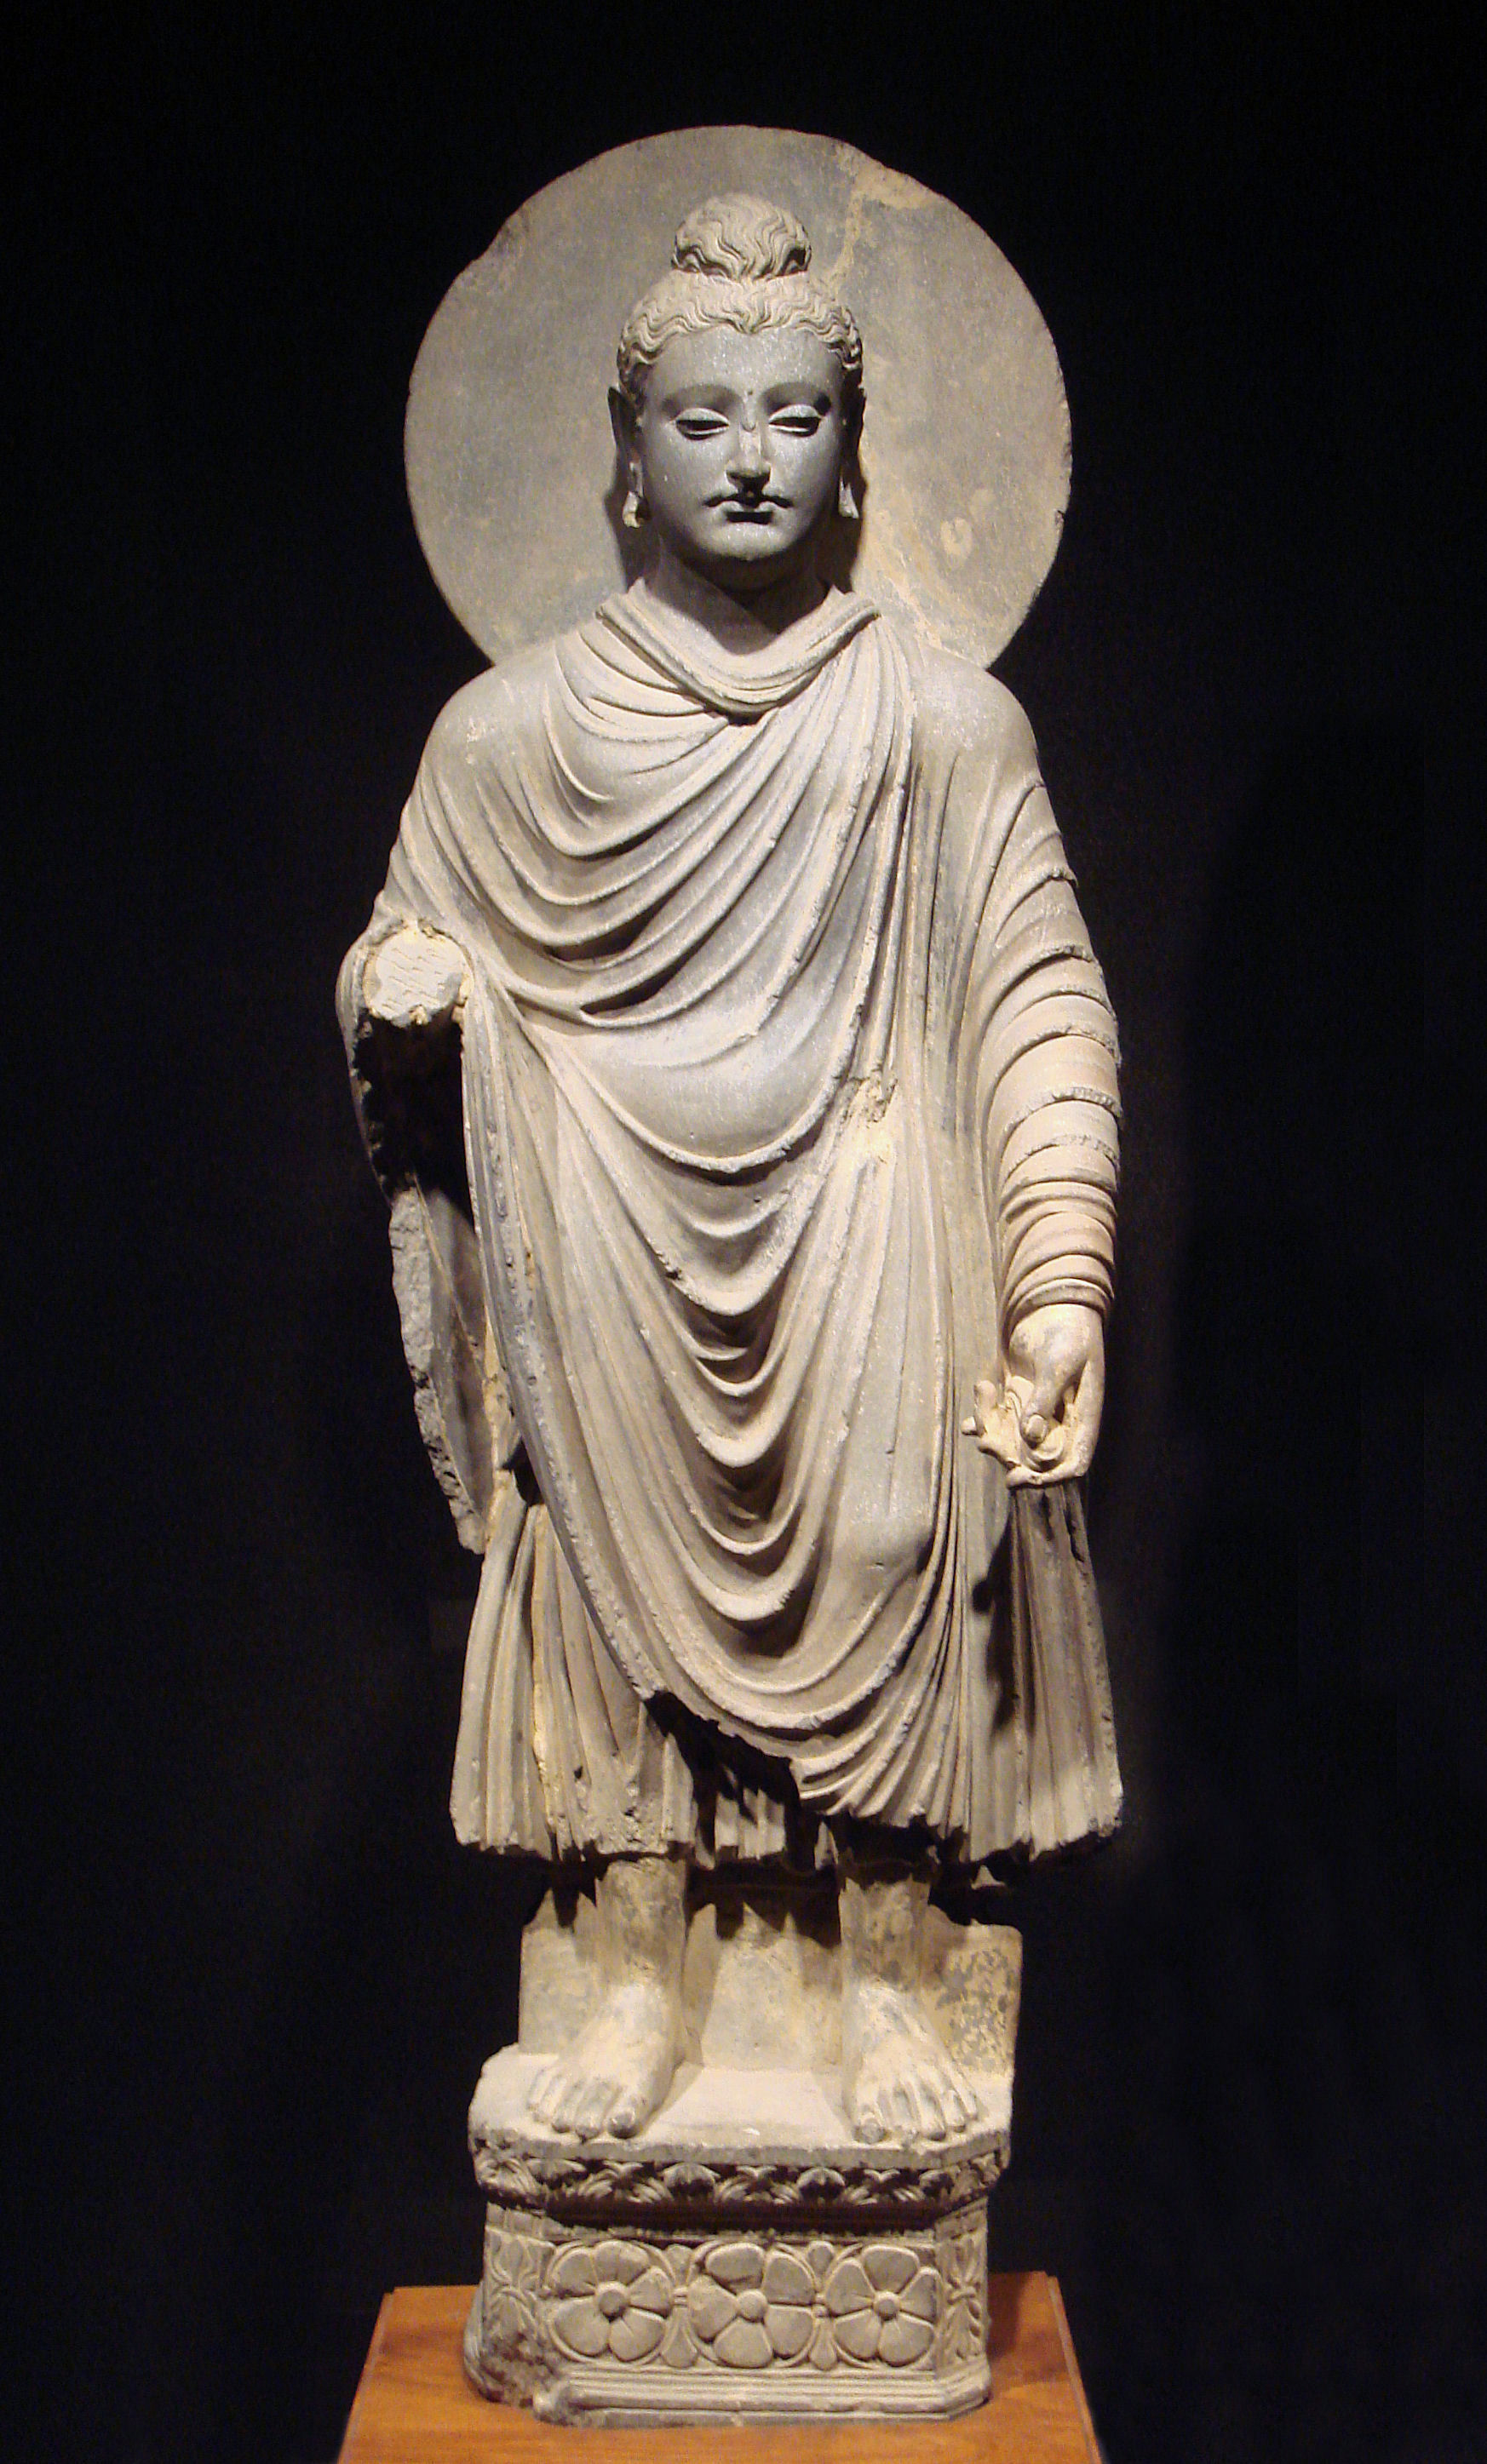 One of the first representations of the Buddha, 1st-2nd century CE, Gandhara  in Pakistan.